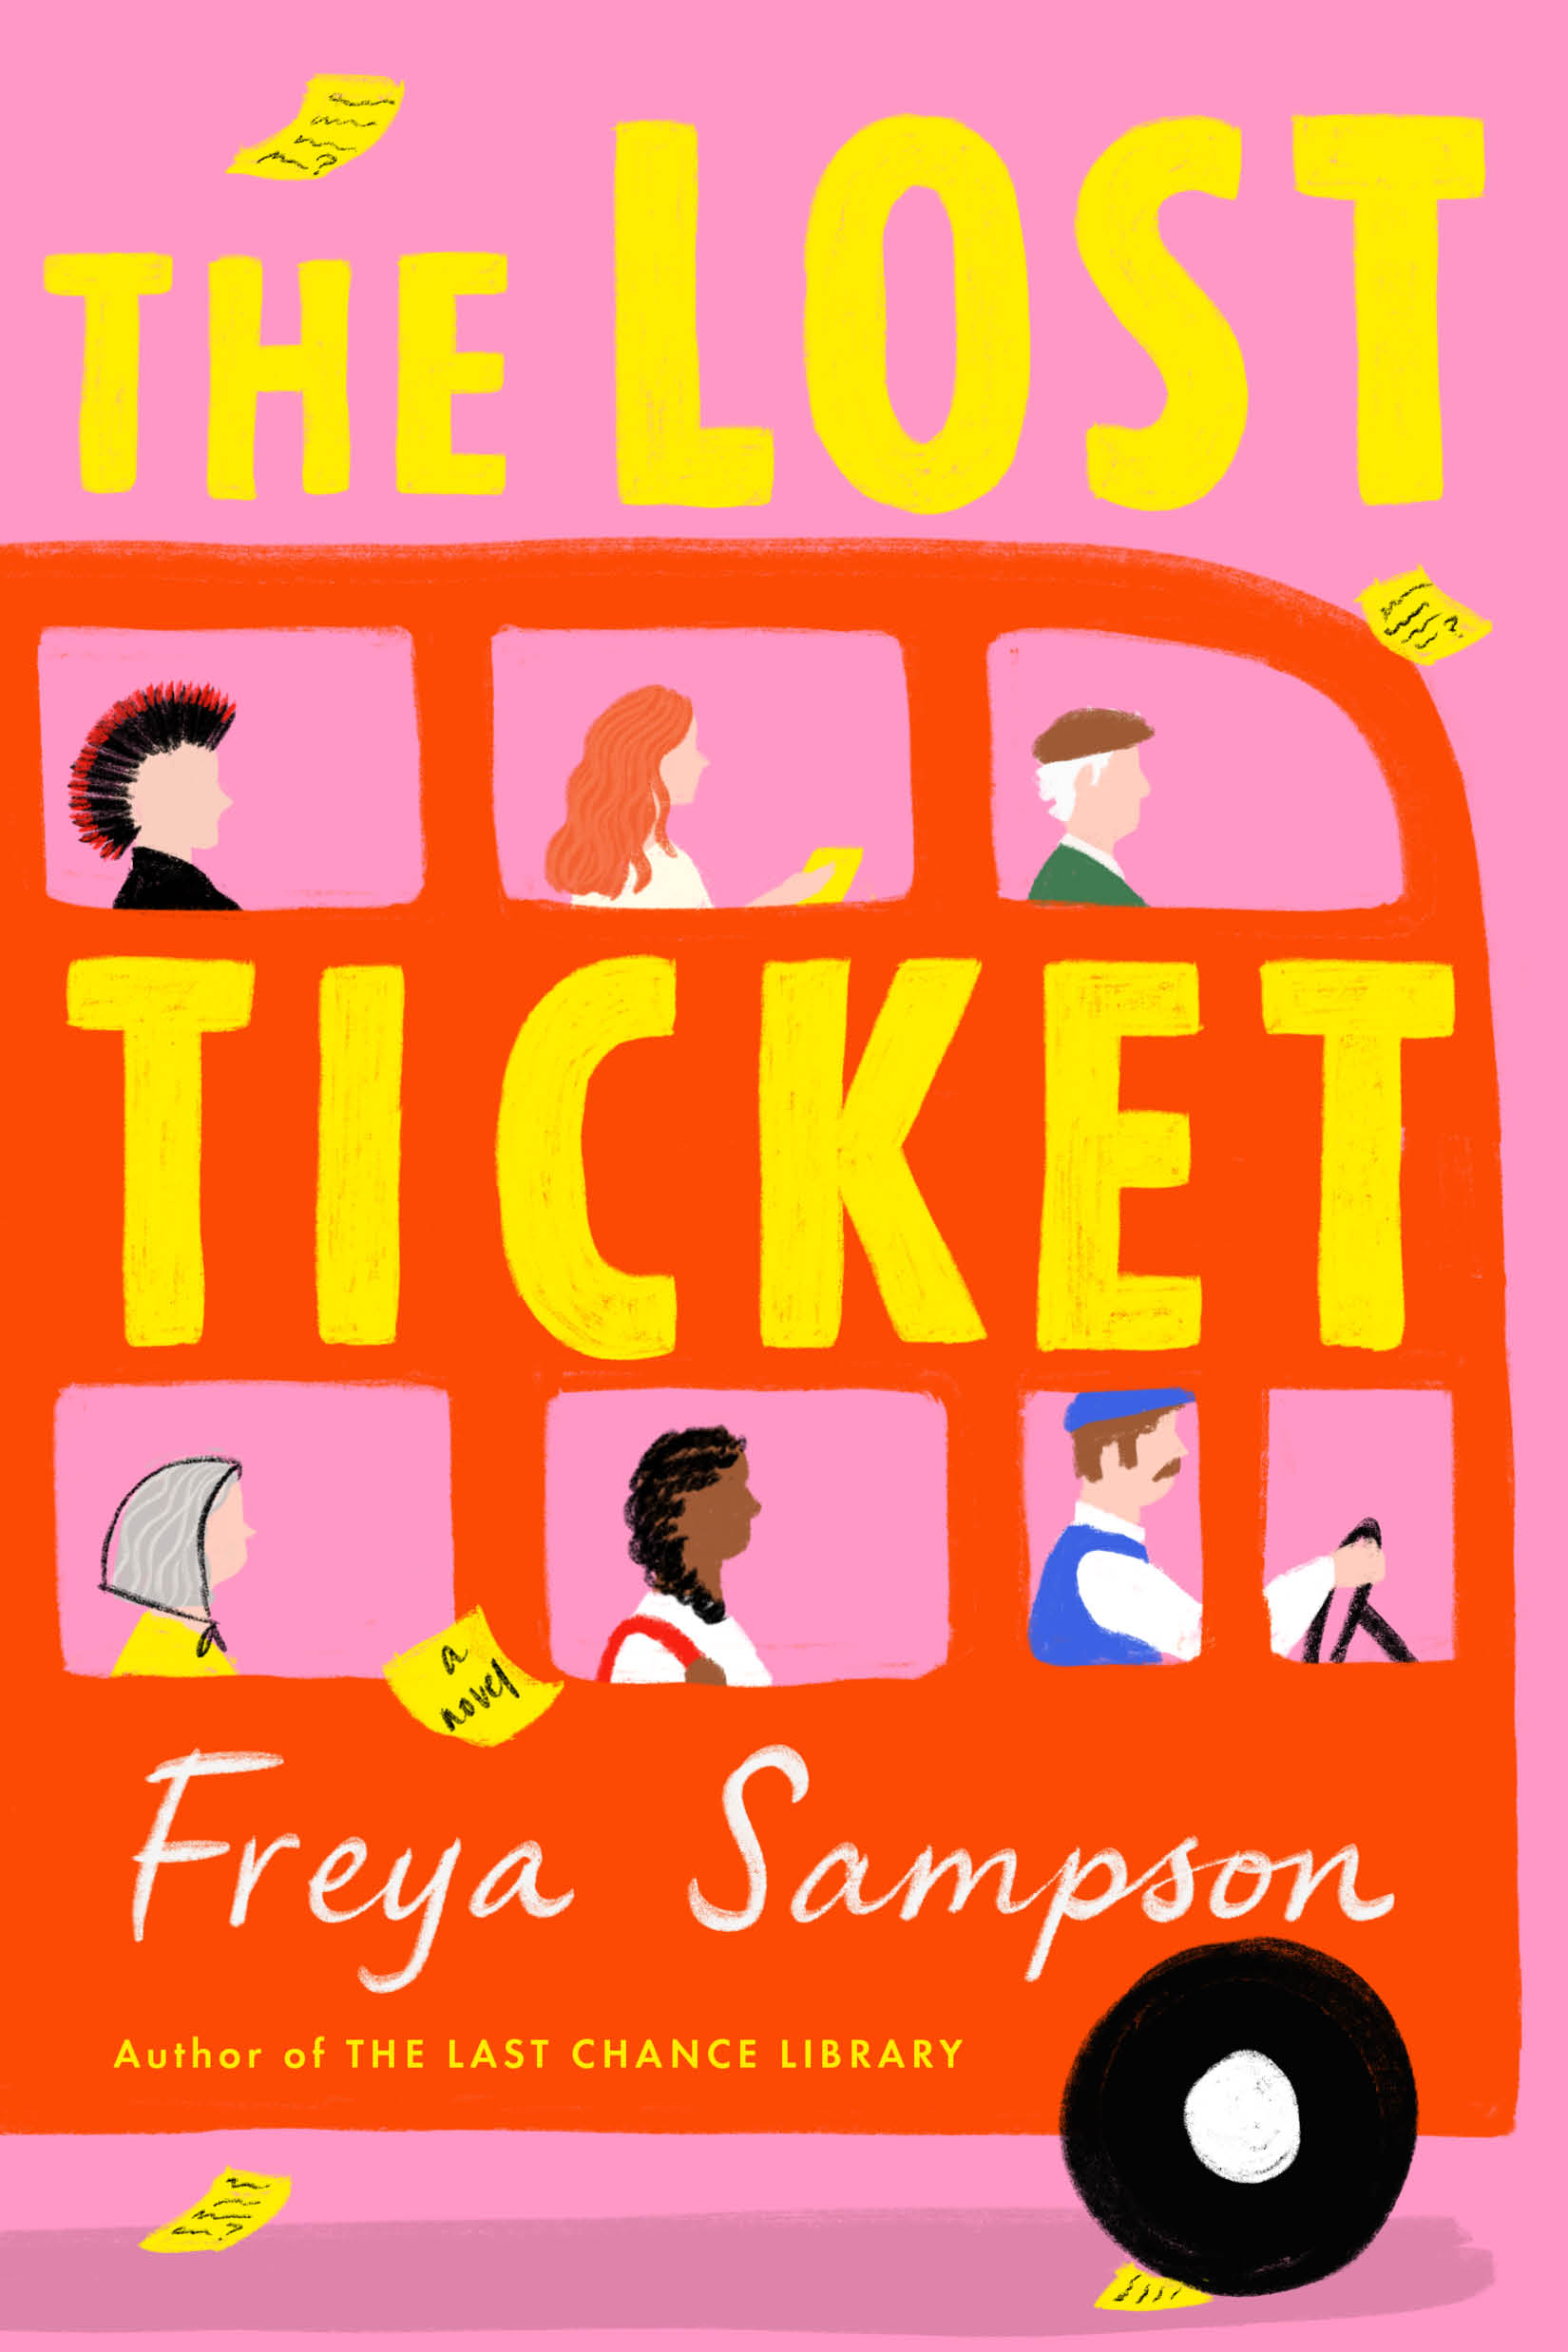 Buy THE LOST TICKET (US) thumbnail